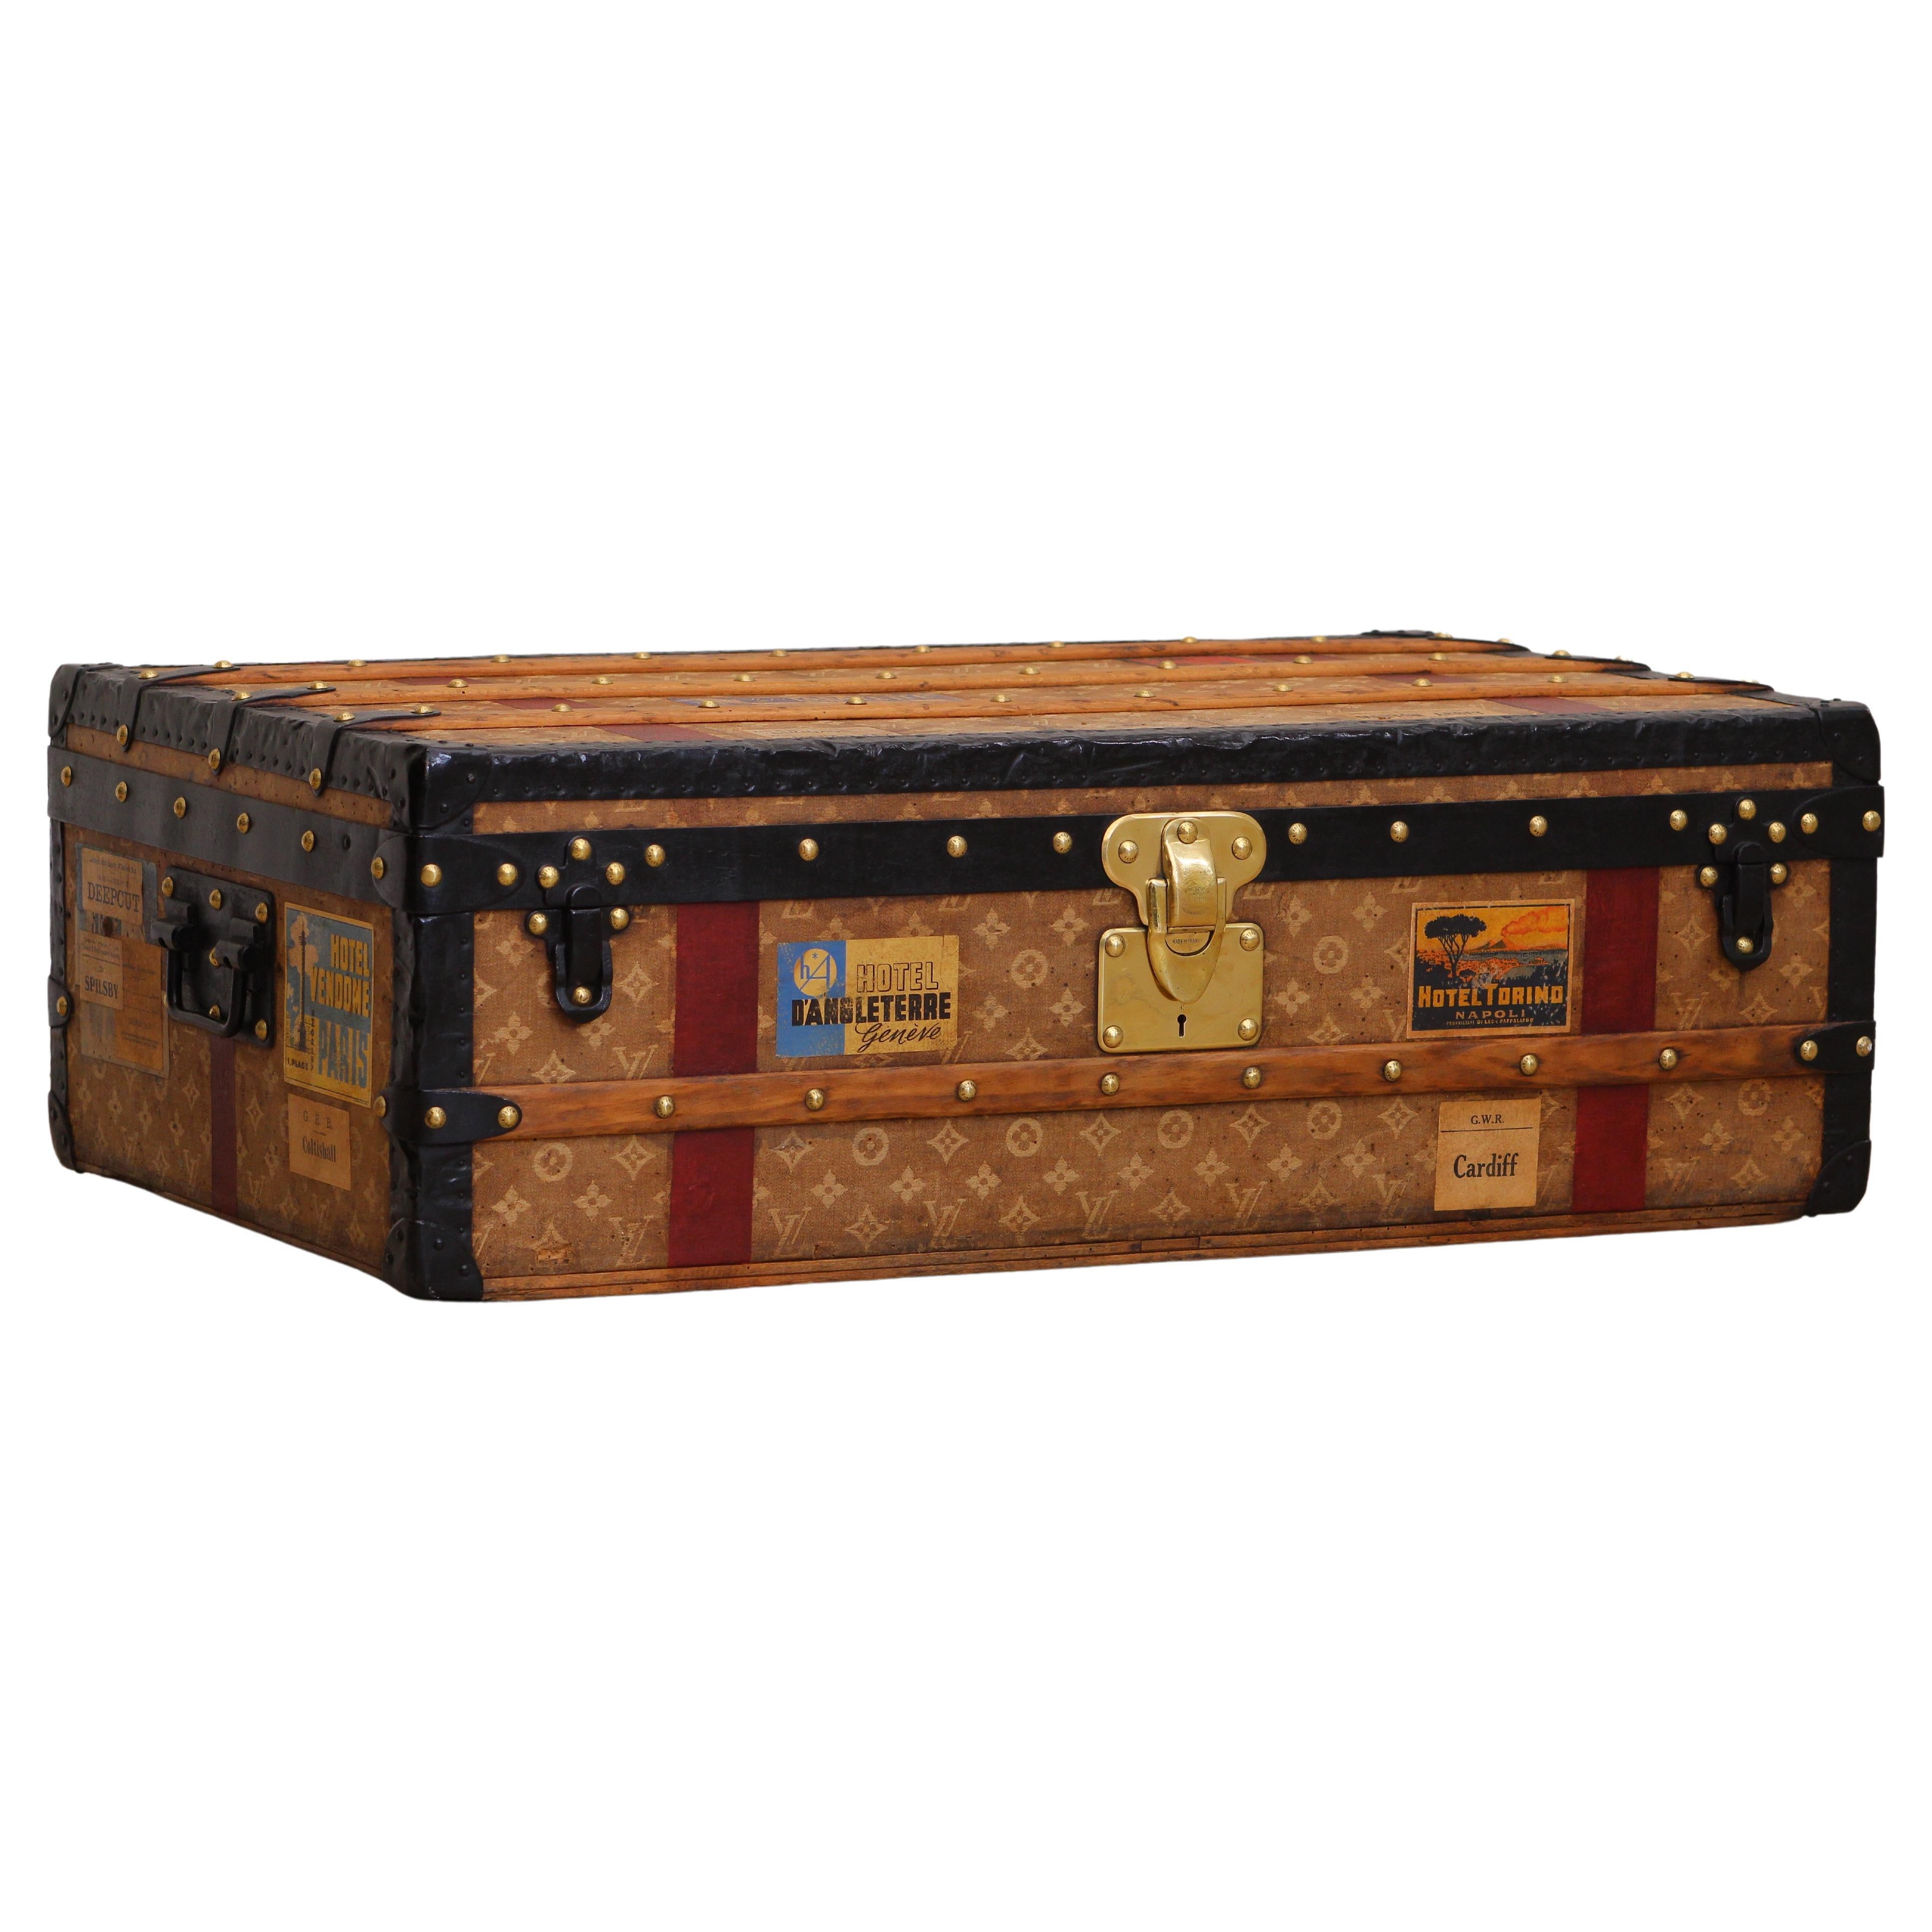 Early 1900s Luggage and Travel Bags